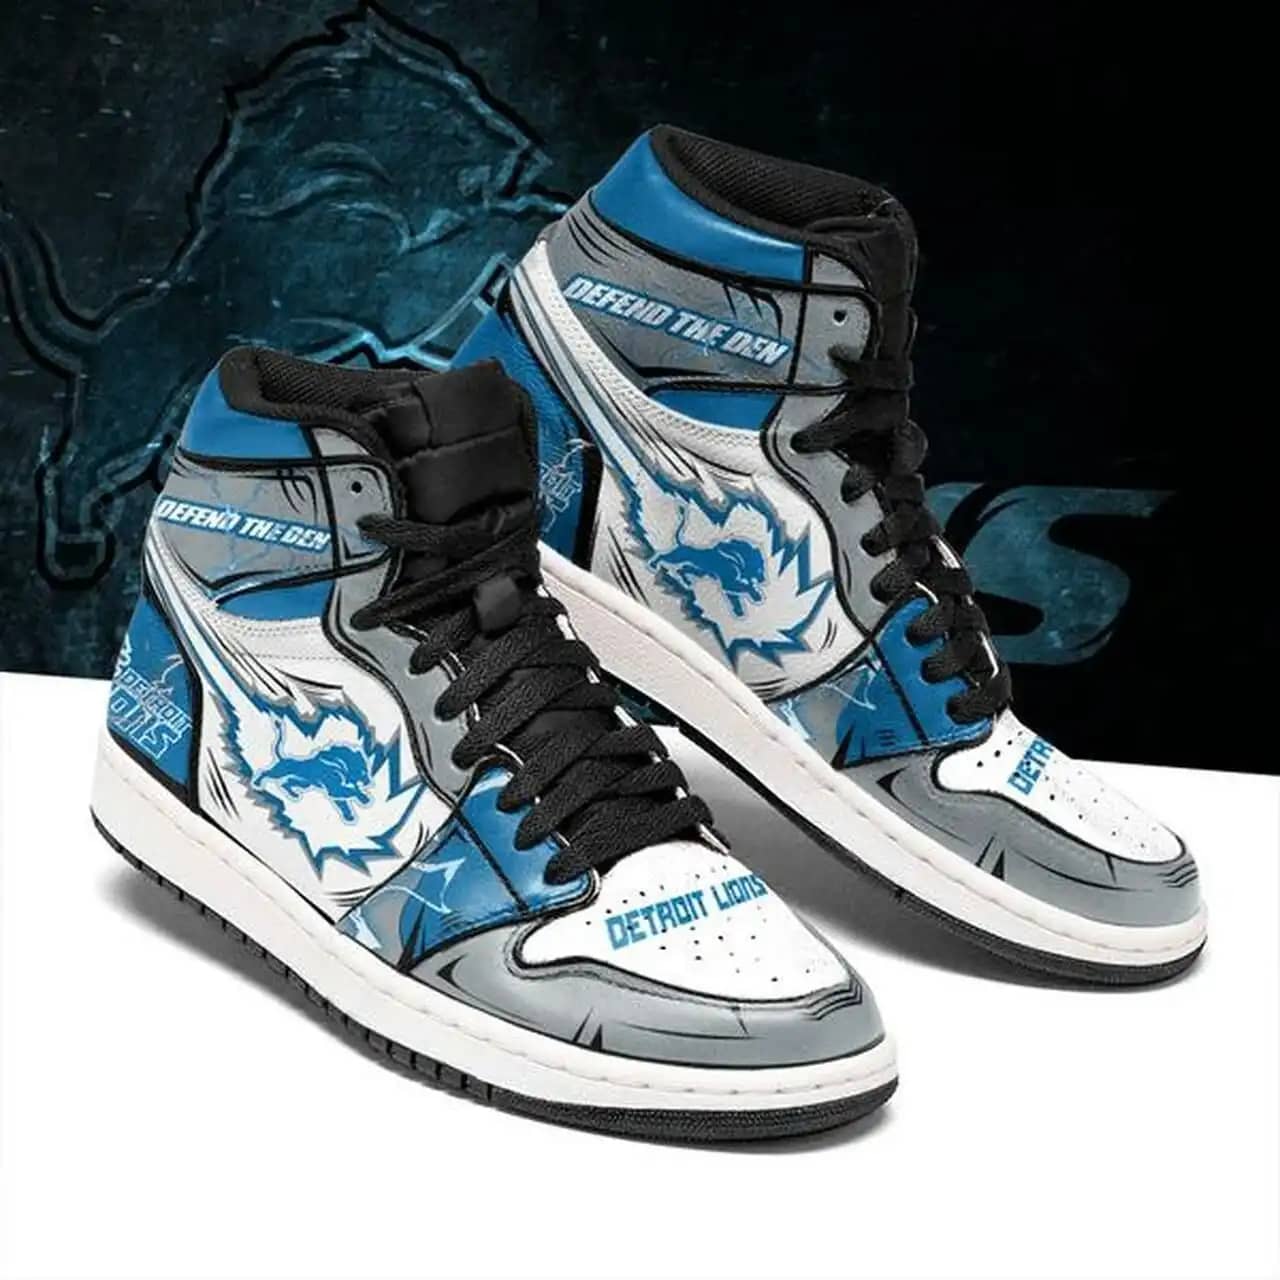 Detroit Lions Nfl American Football Team Perfect Gift For Sports Fans Air Jordan Shoes